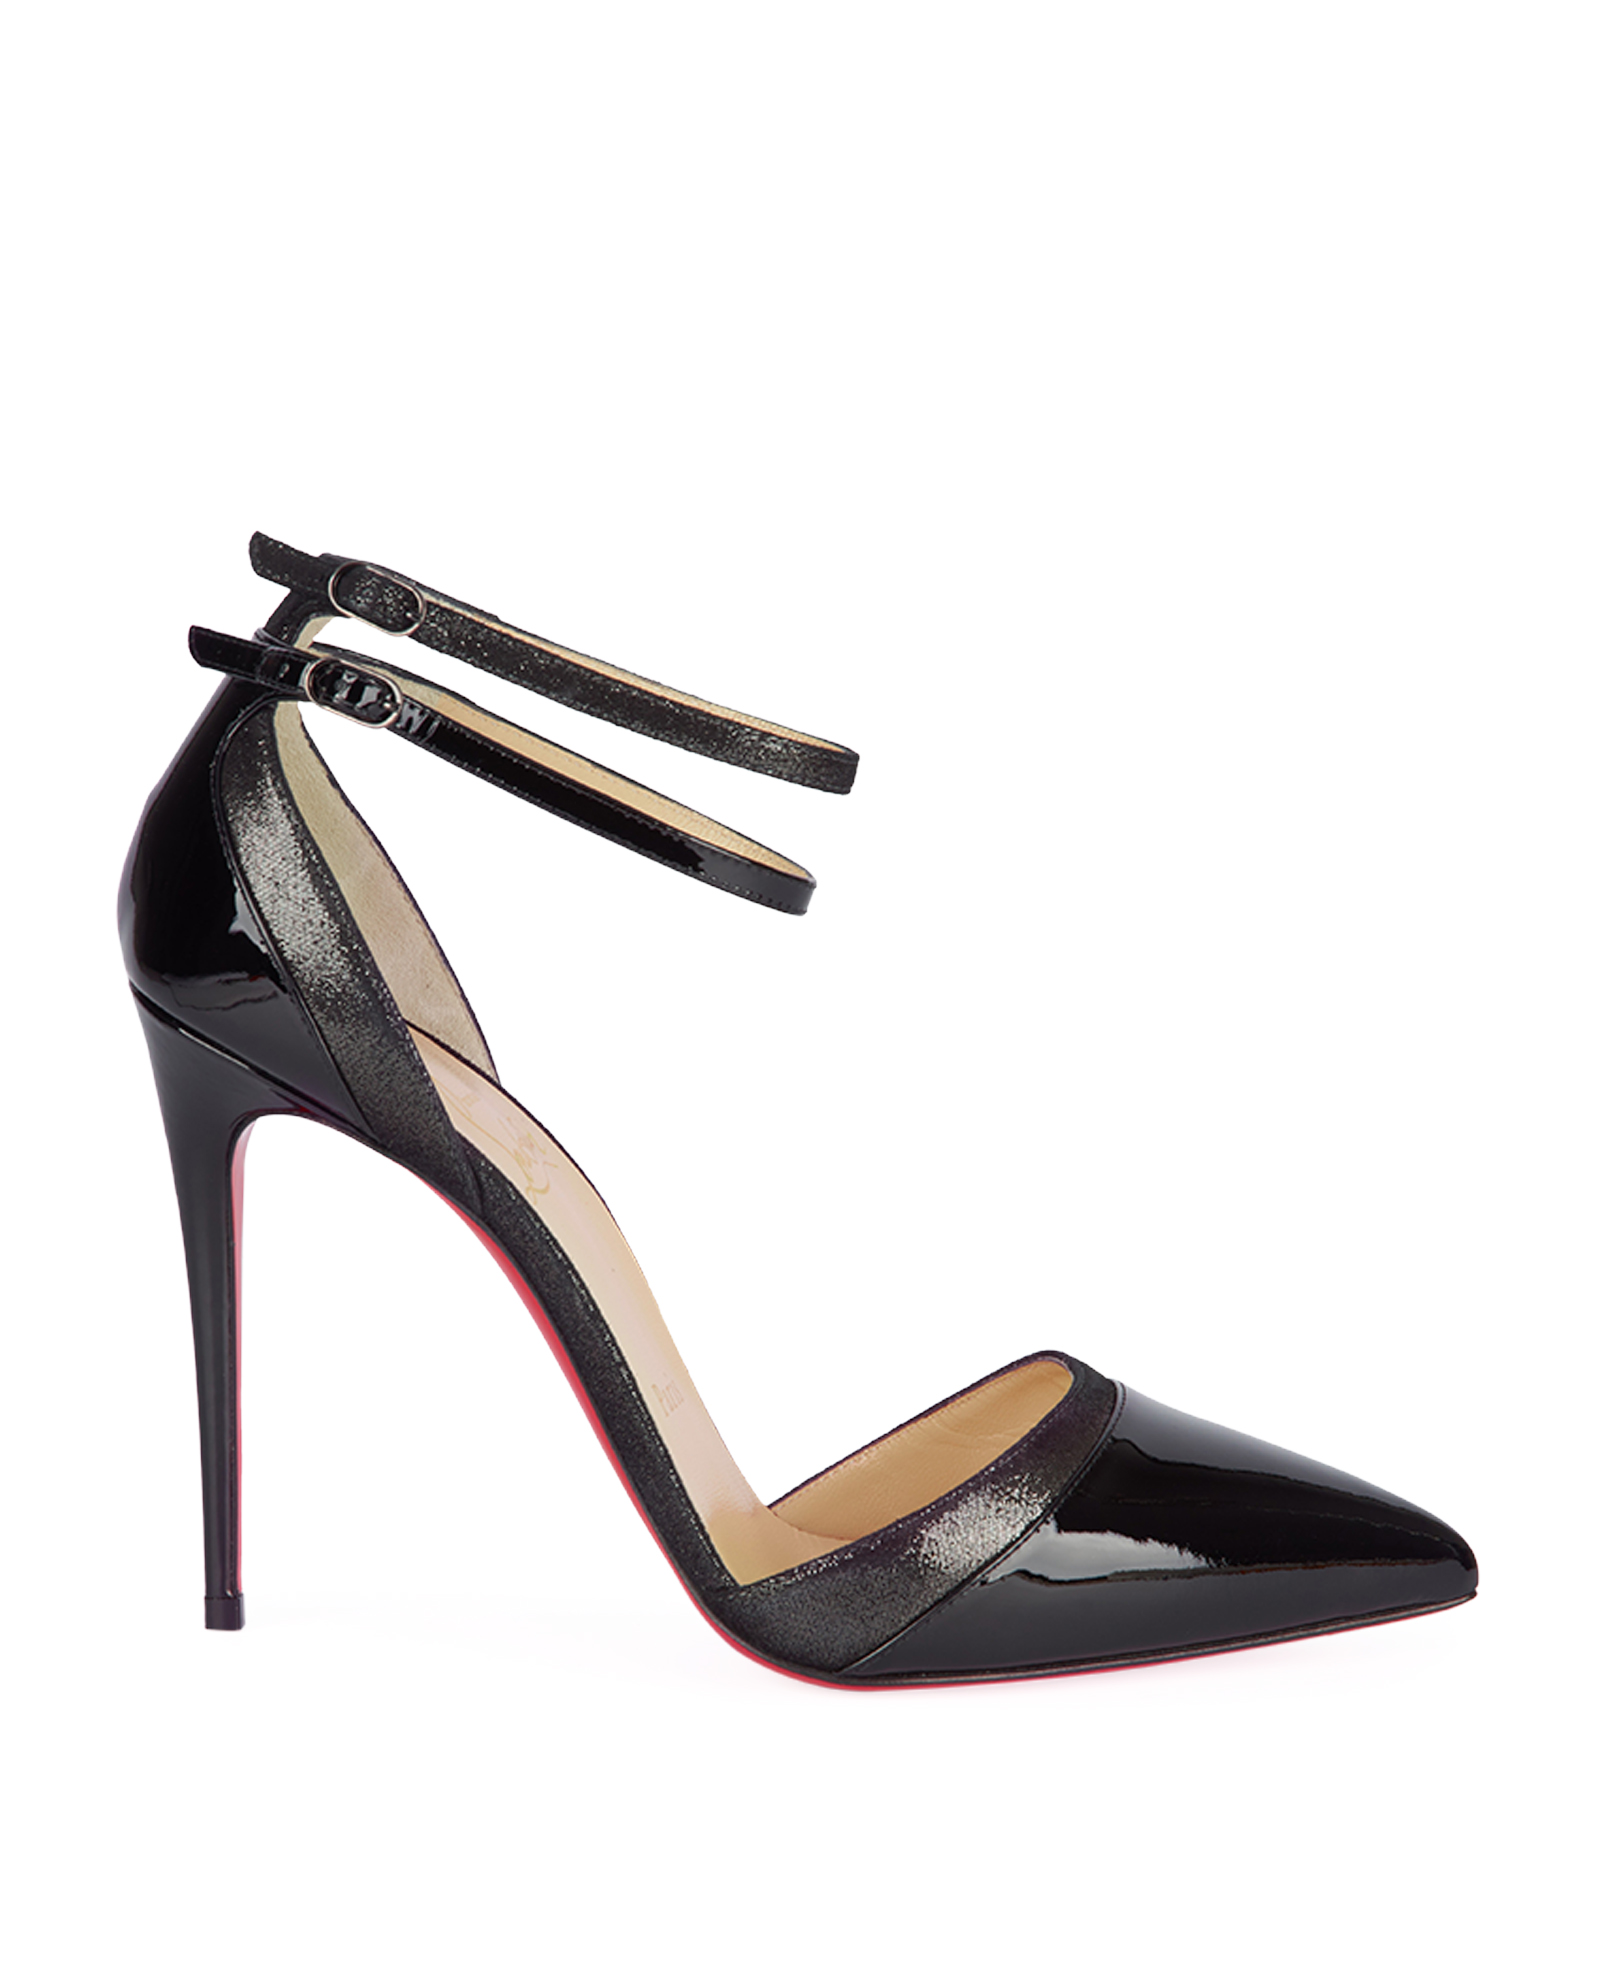 christian louboutin strappy heels